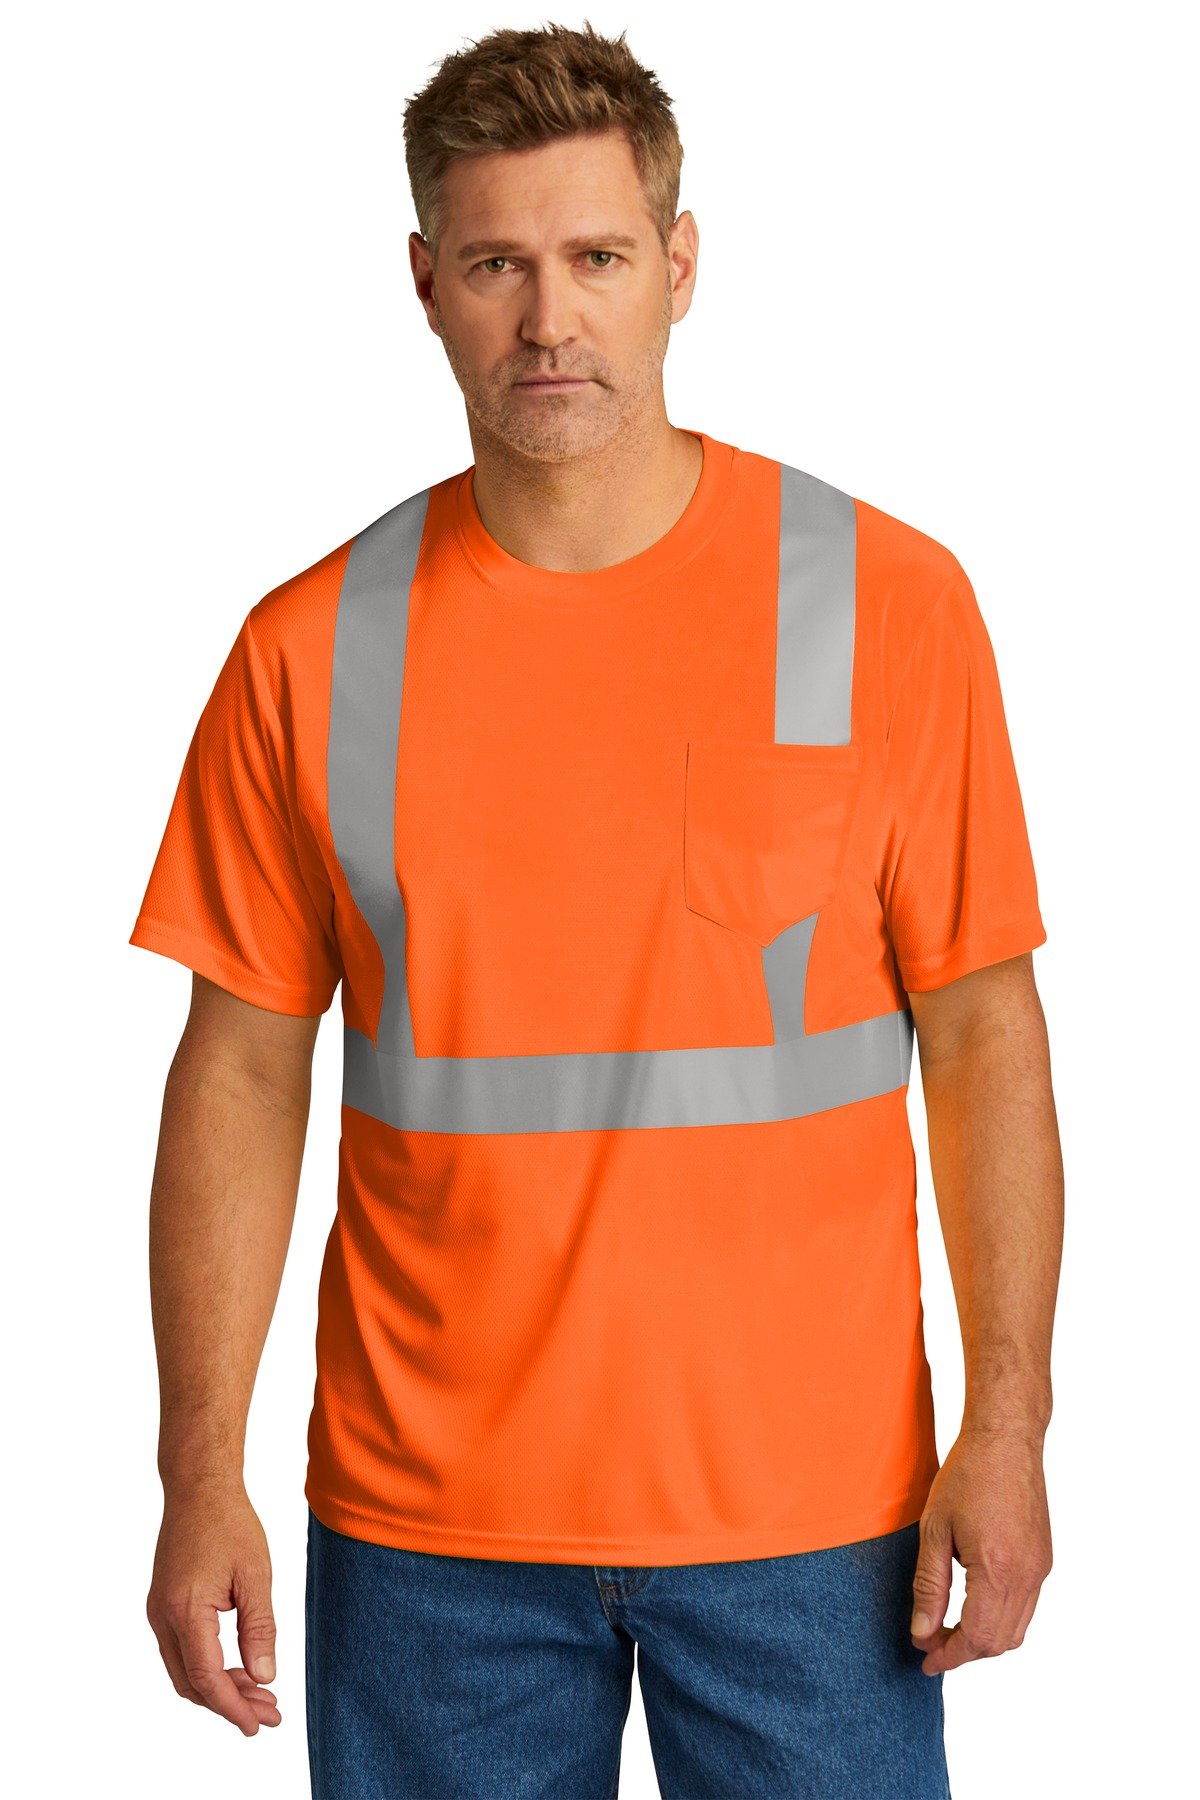 Front view of ANSI 107 Class 2 Mesh Tee